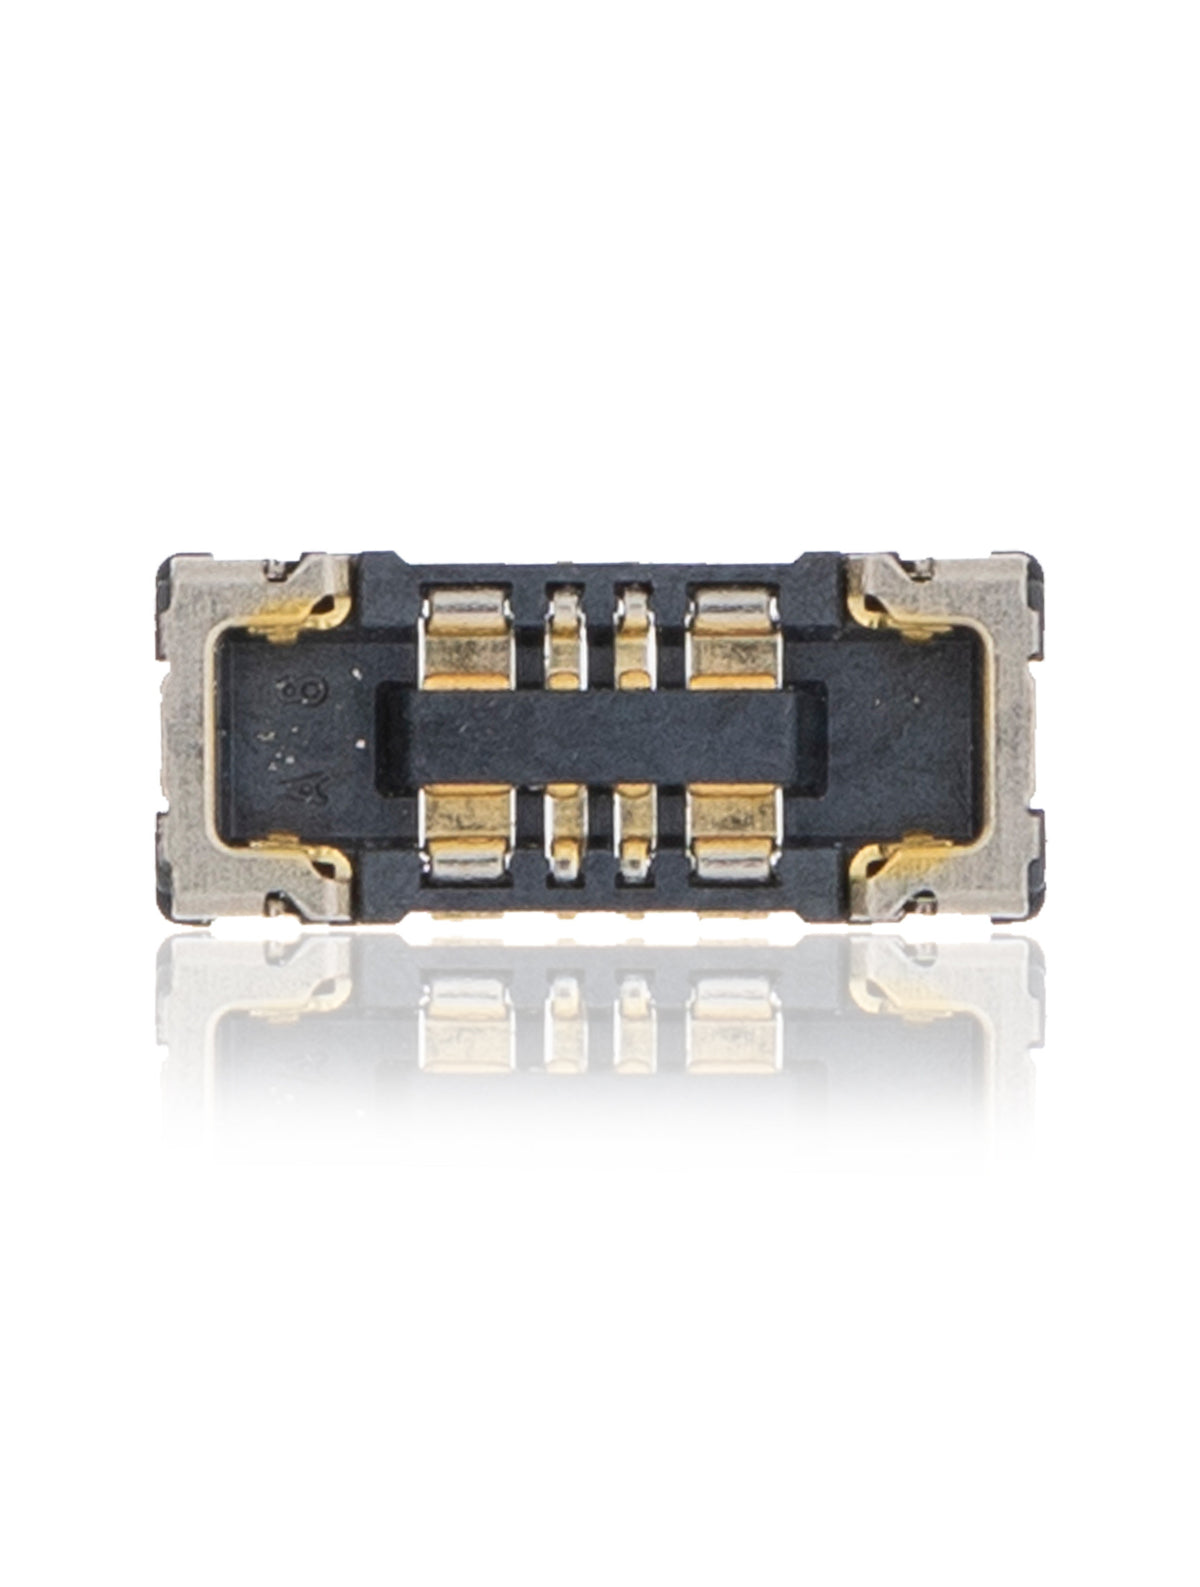 VOLUME BUTTON FLEX FPC CONNECTOR COMPATIBLE WITH IPHONE XS / XS MAX (J3500: 4 PIN)